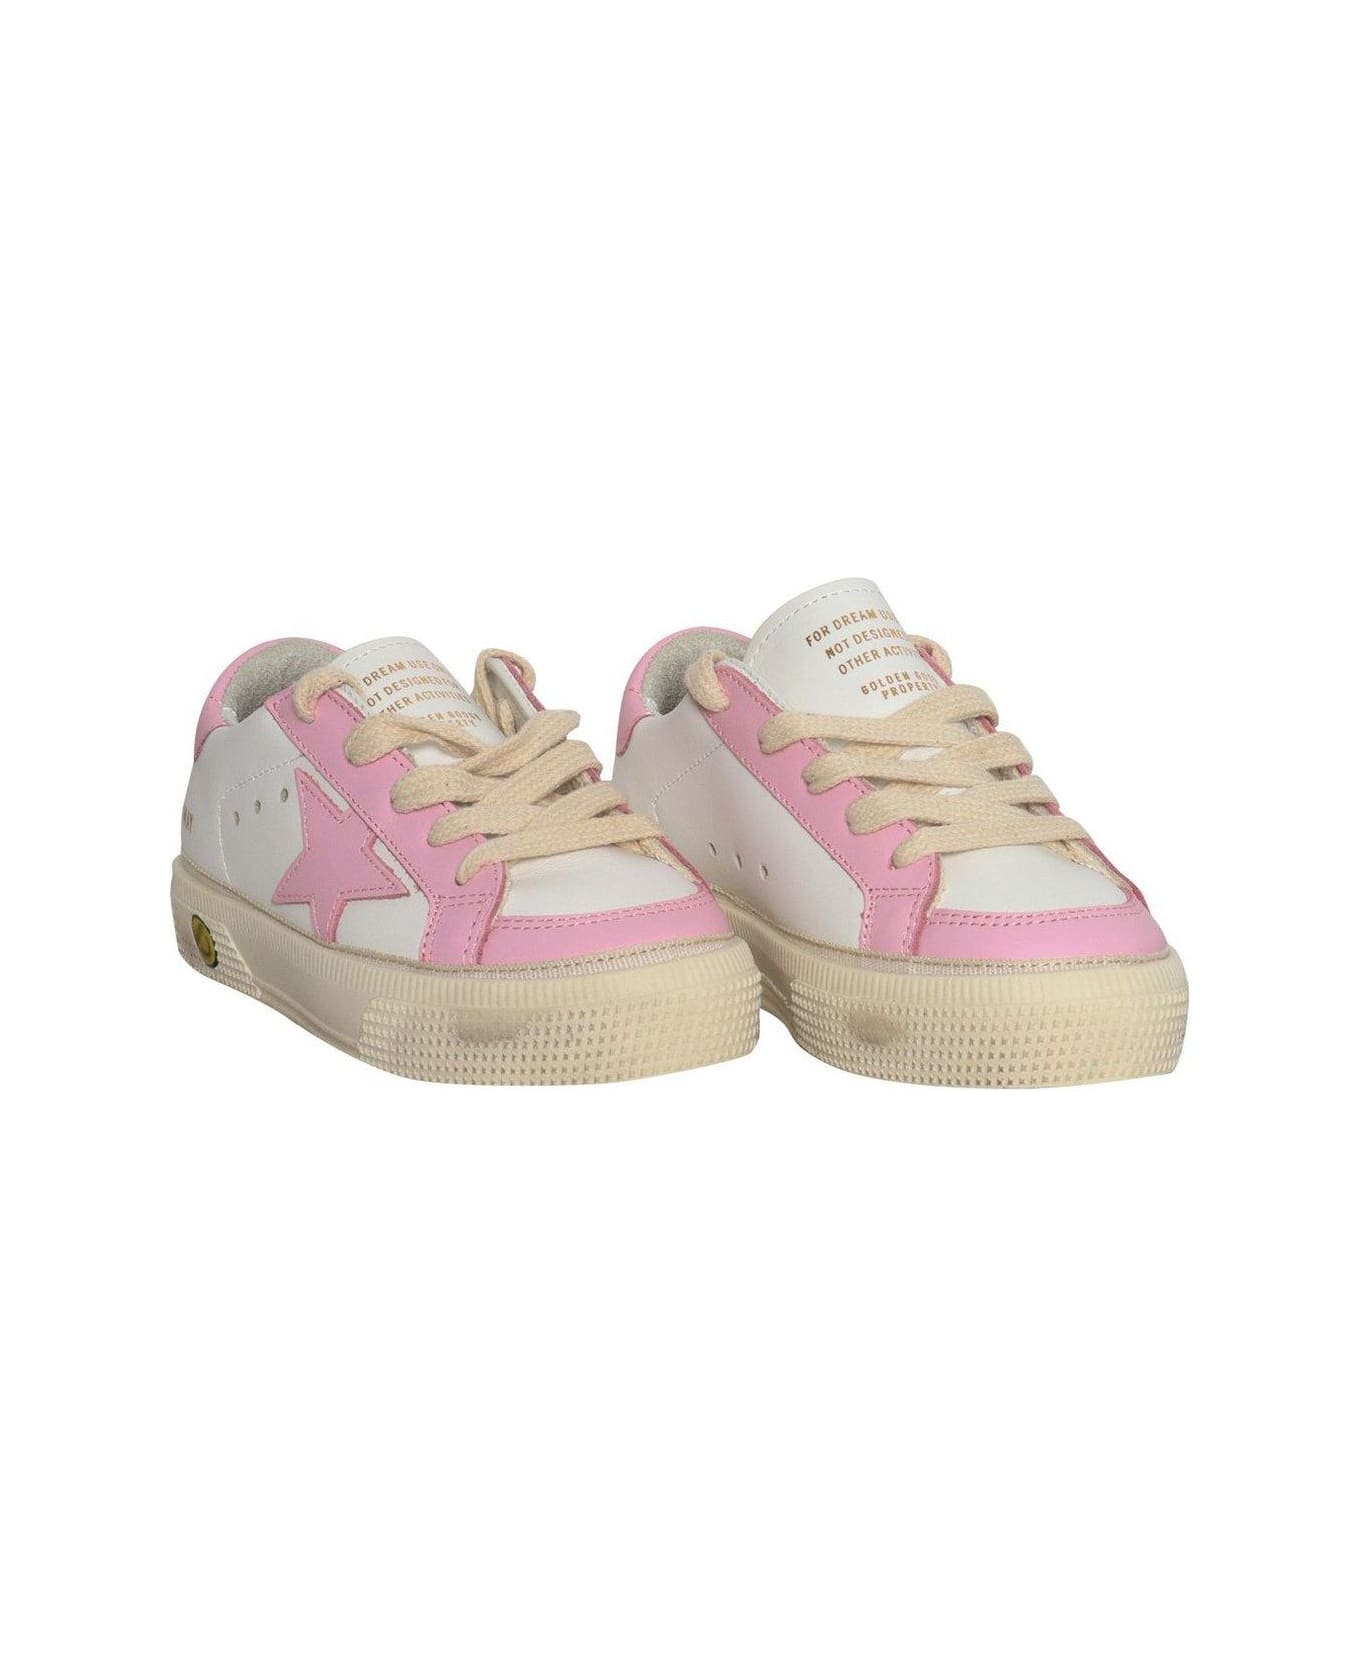 Golden Goose Young May Star Patch Sneakers - Bianco/rosa